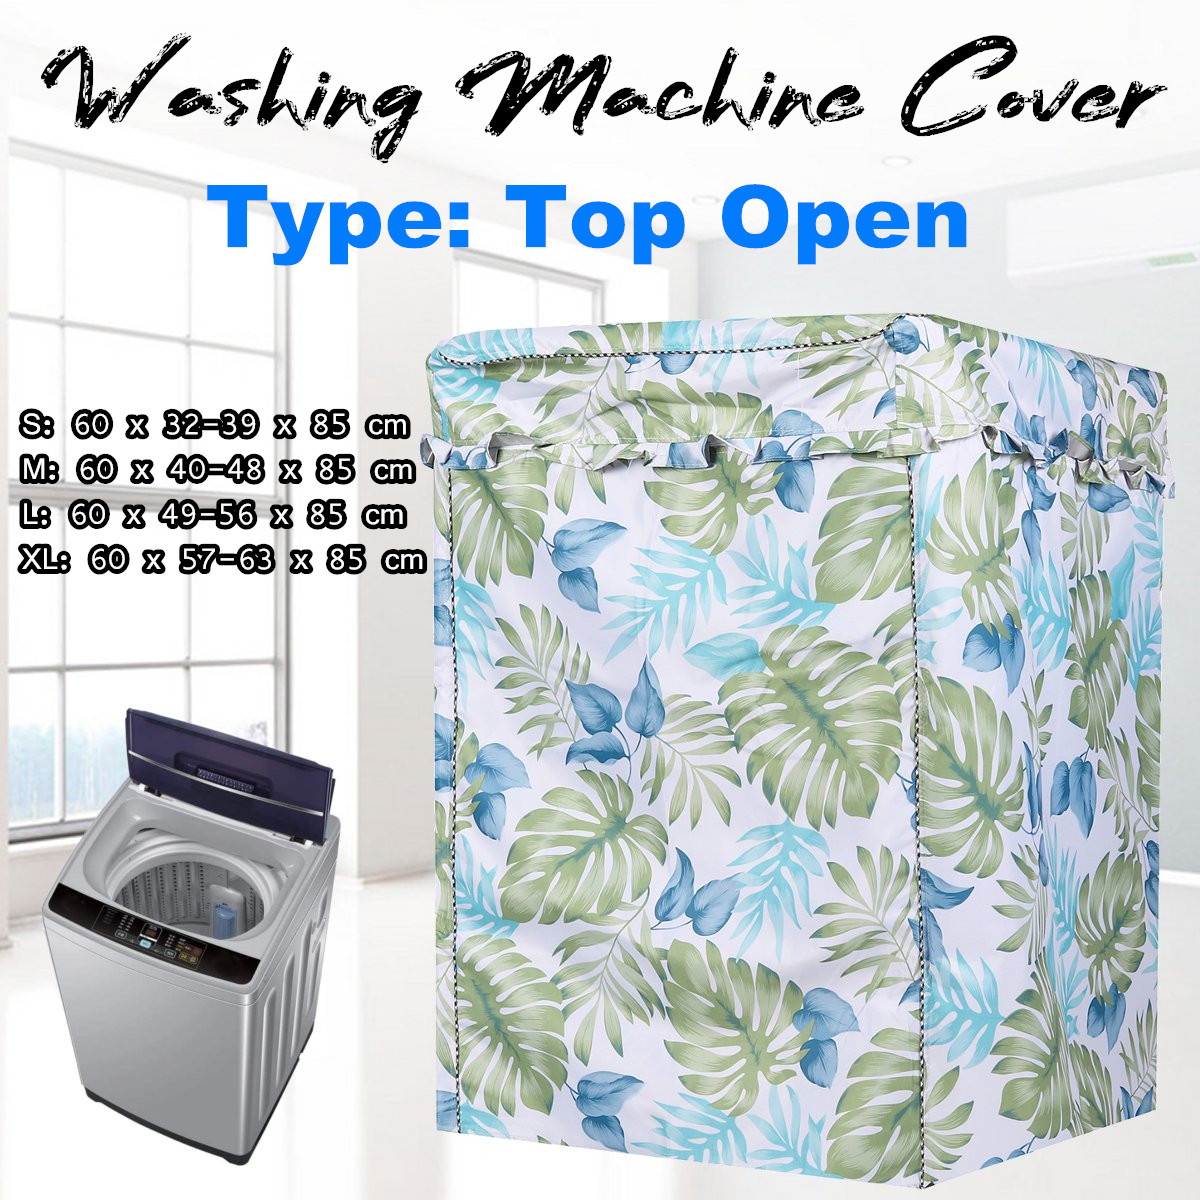 Waterproof-Washing-Machine-Cover-Home-Polyester-Roller-Laundry-Silver-Coating-Dustproof-Case-Cover-1831916-1